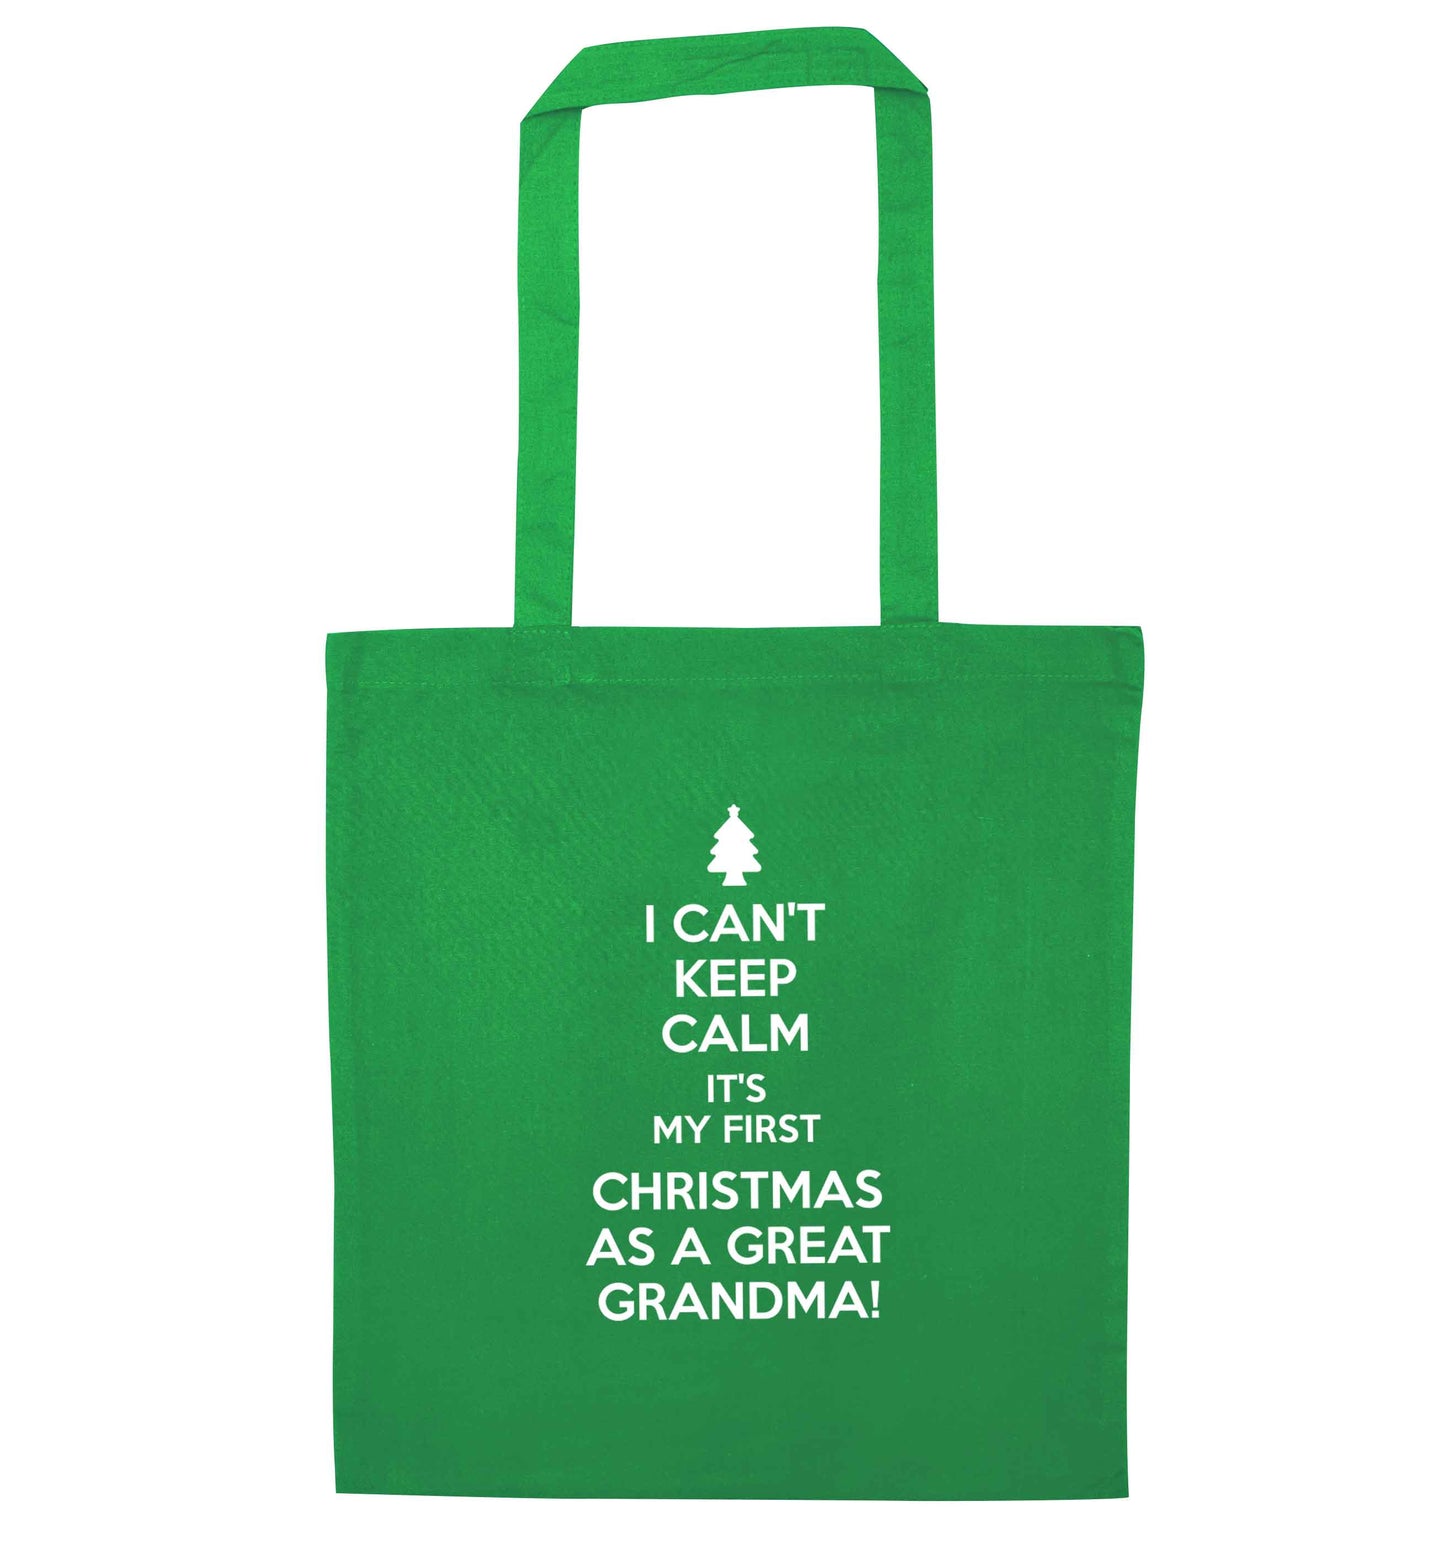 I can't keep calm it's my first Christmas as a great grandma! green tote bag